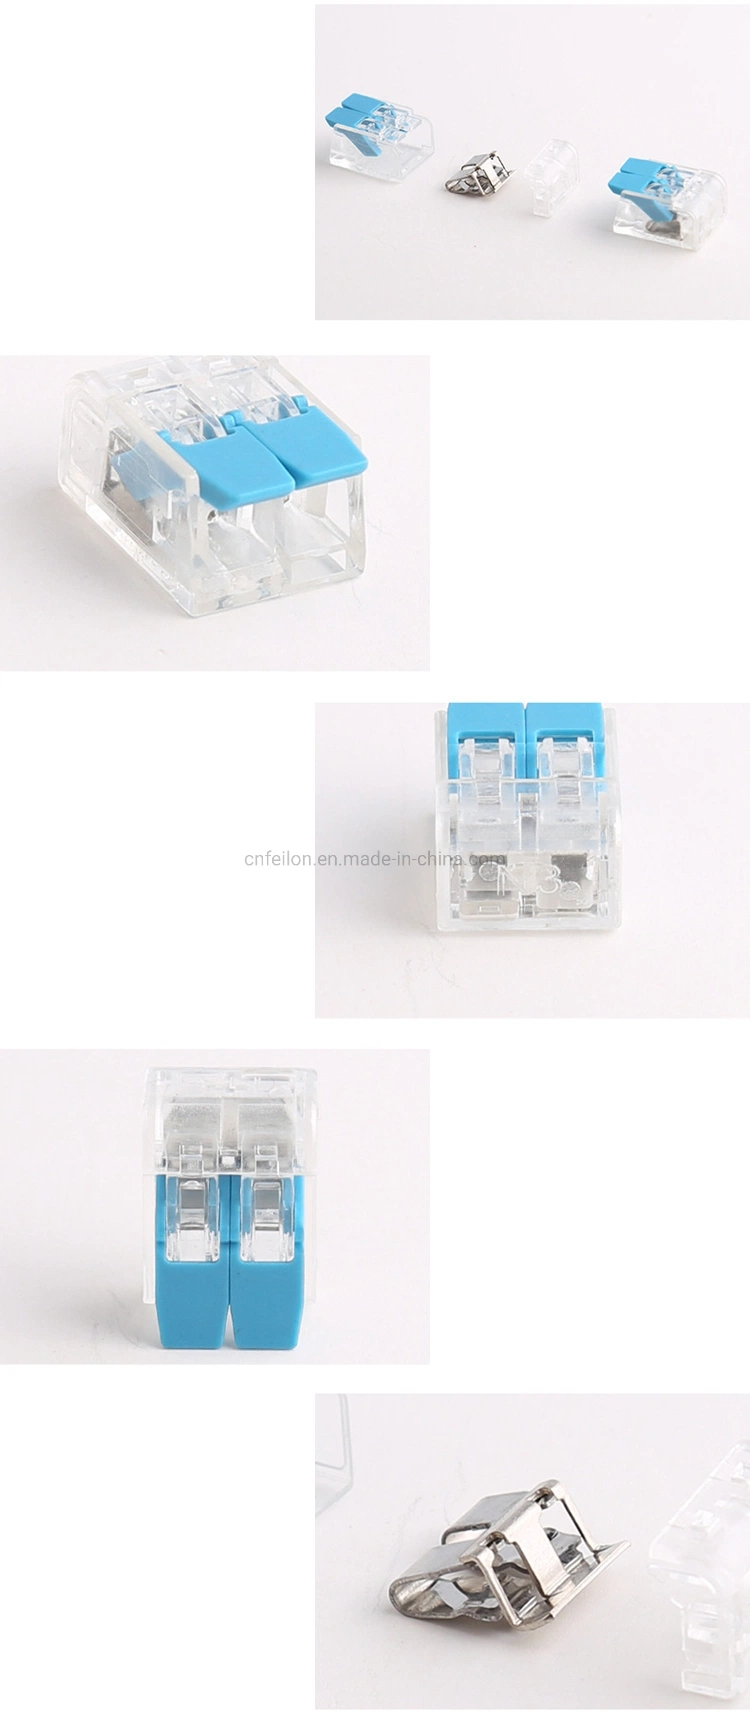 Origin China Replace 221-412 Mini Size 2 Poles Electrical Lever Connector Pct-412 Universal Wire Cable Connector Can Reusable CE Building Compact Terminal Block